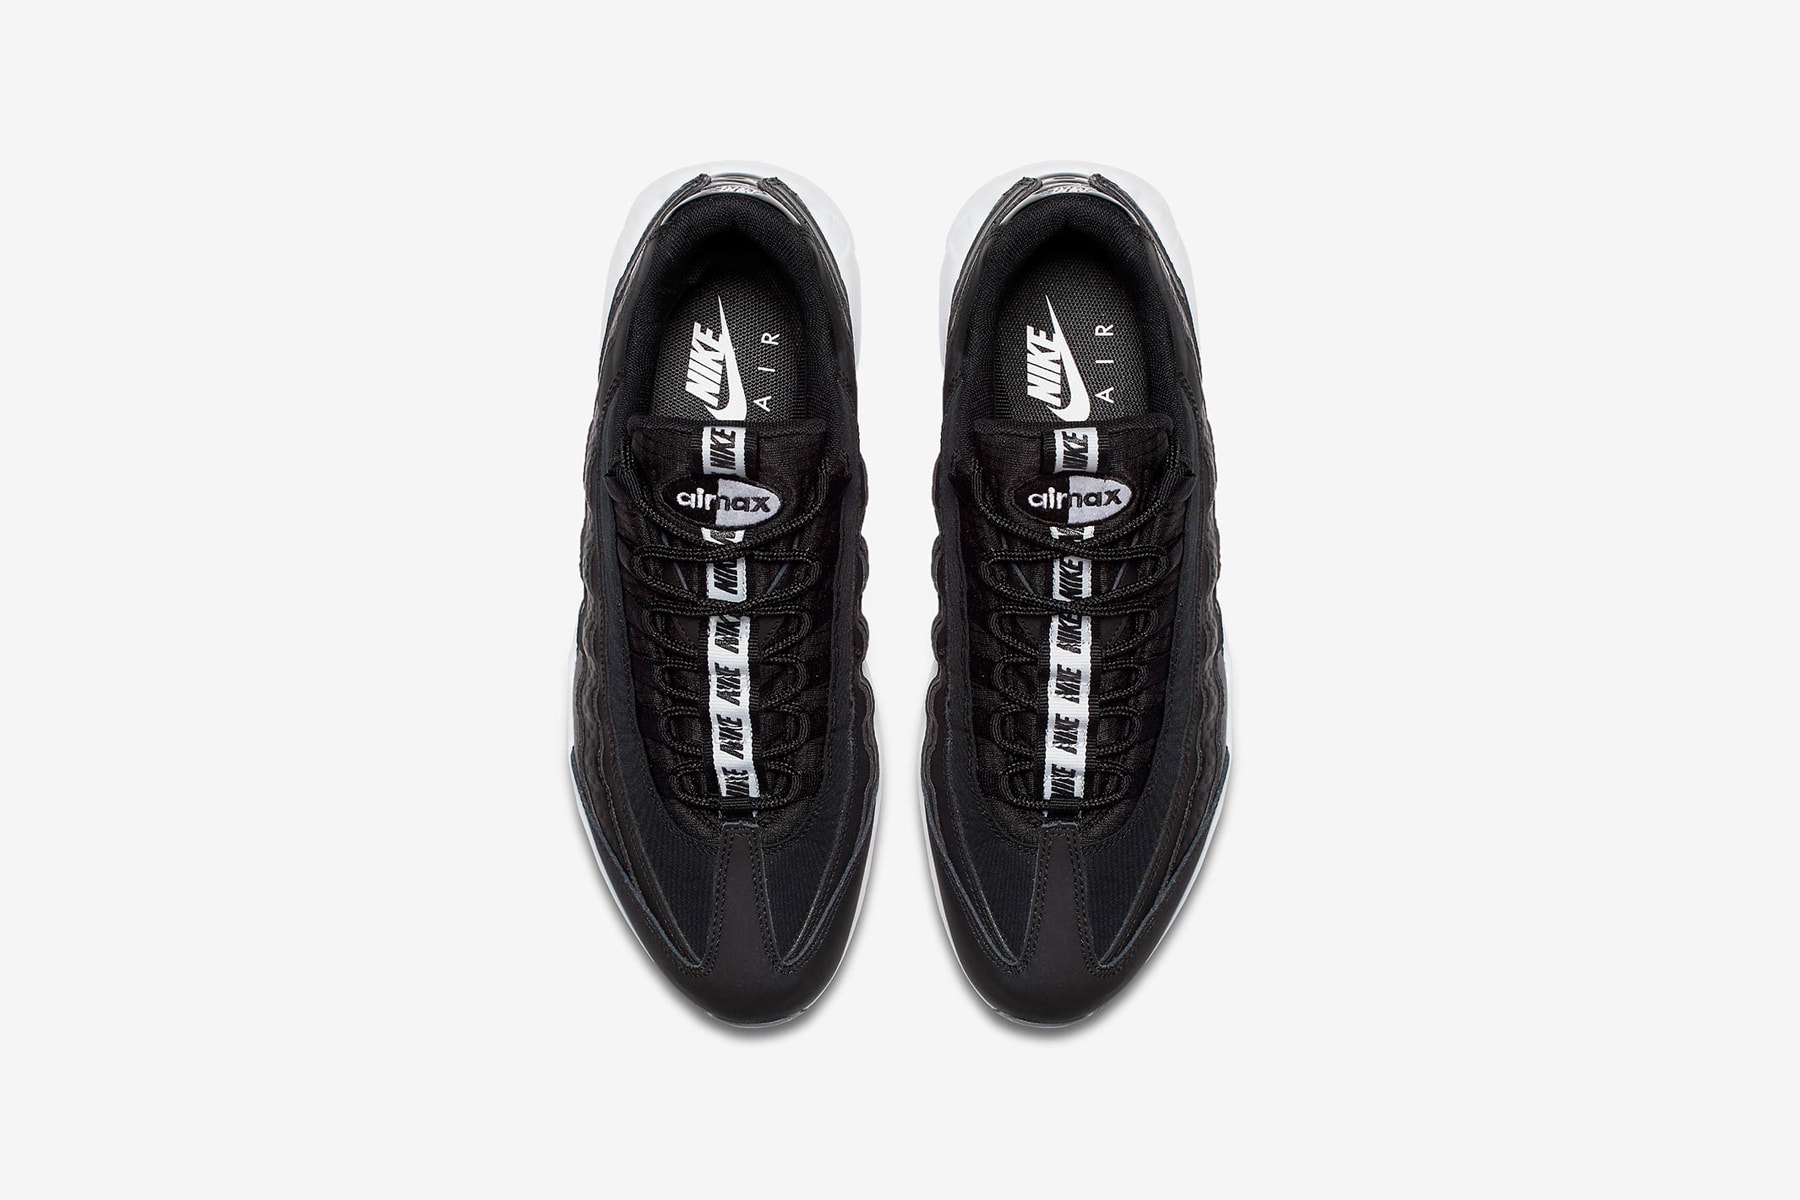 nike air max 95 pull tab slip on black insole top view